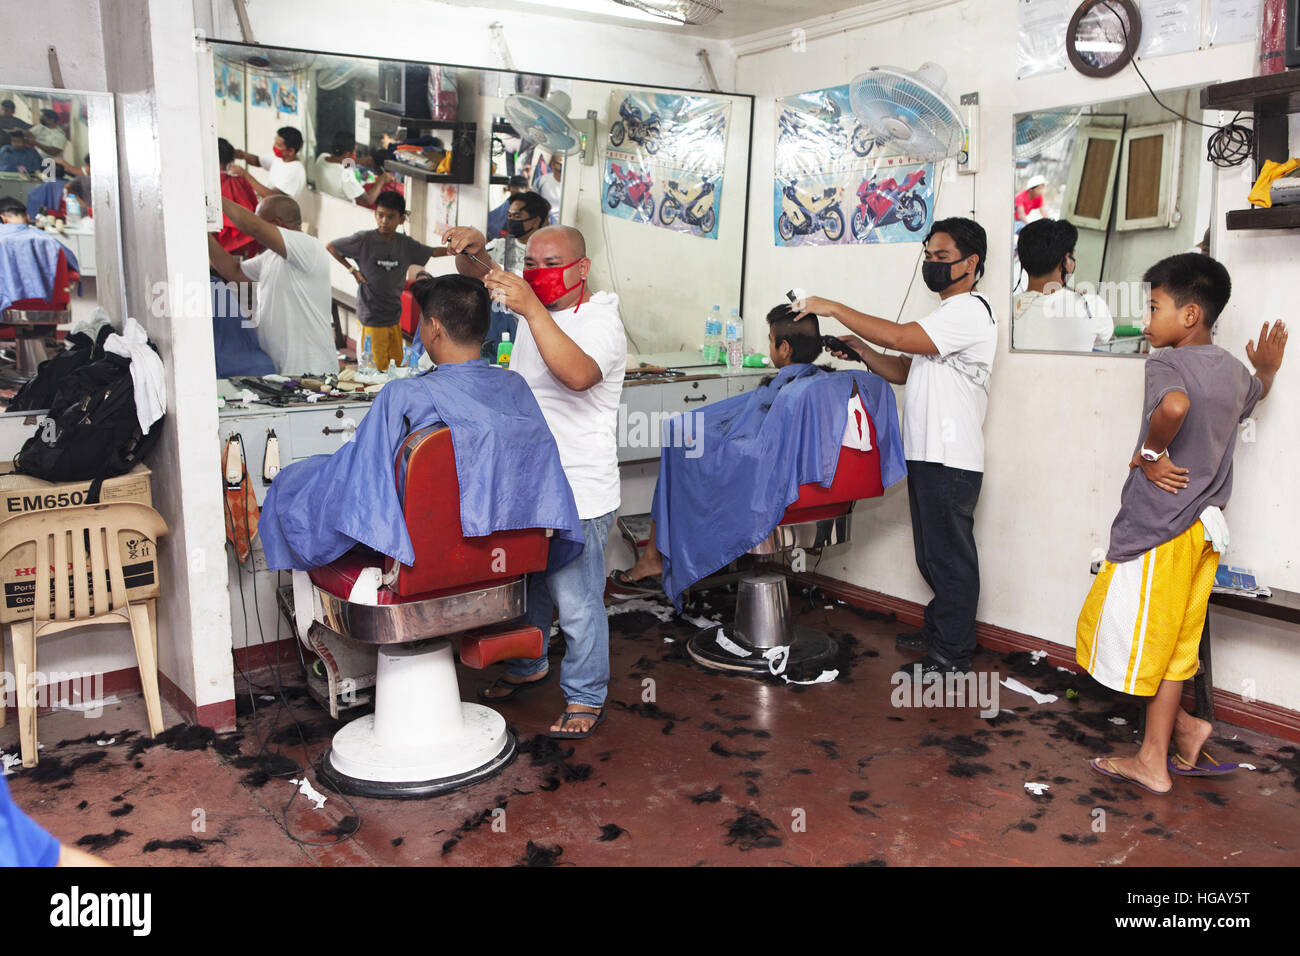 Barbers cutting customer hair inside a barbershop in Barretto Town, Subic Bay, Luzon Island, Philippines. Stock Photo